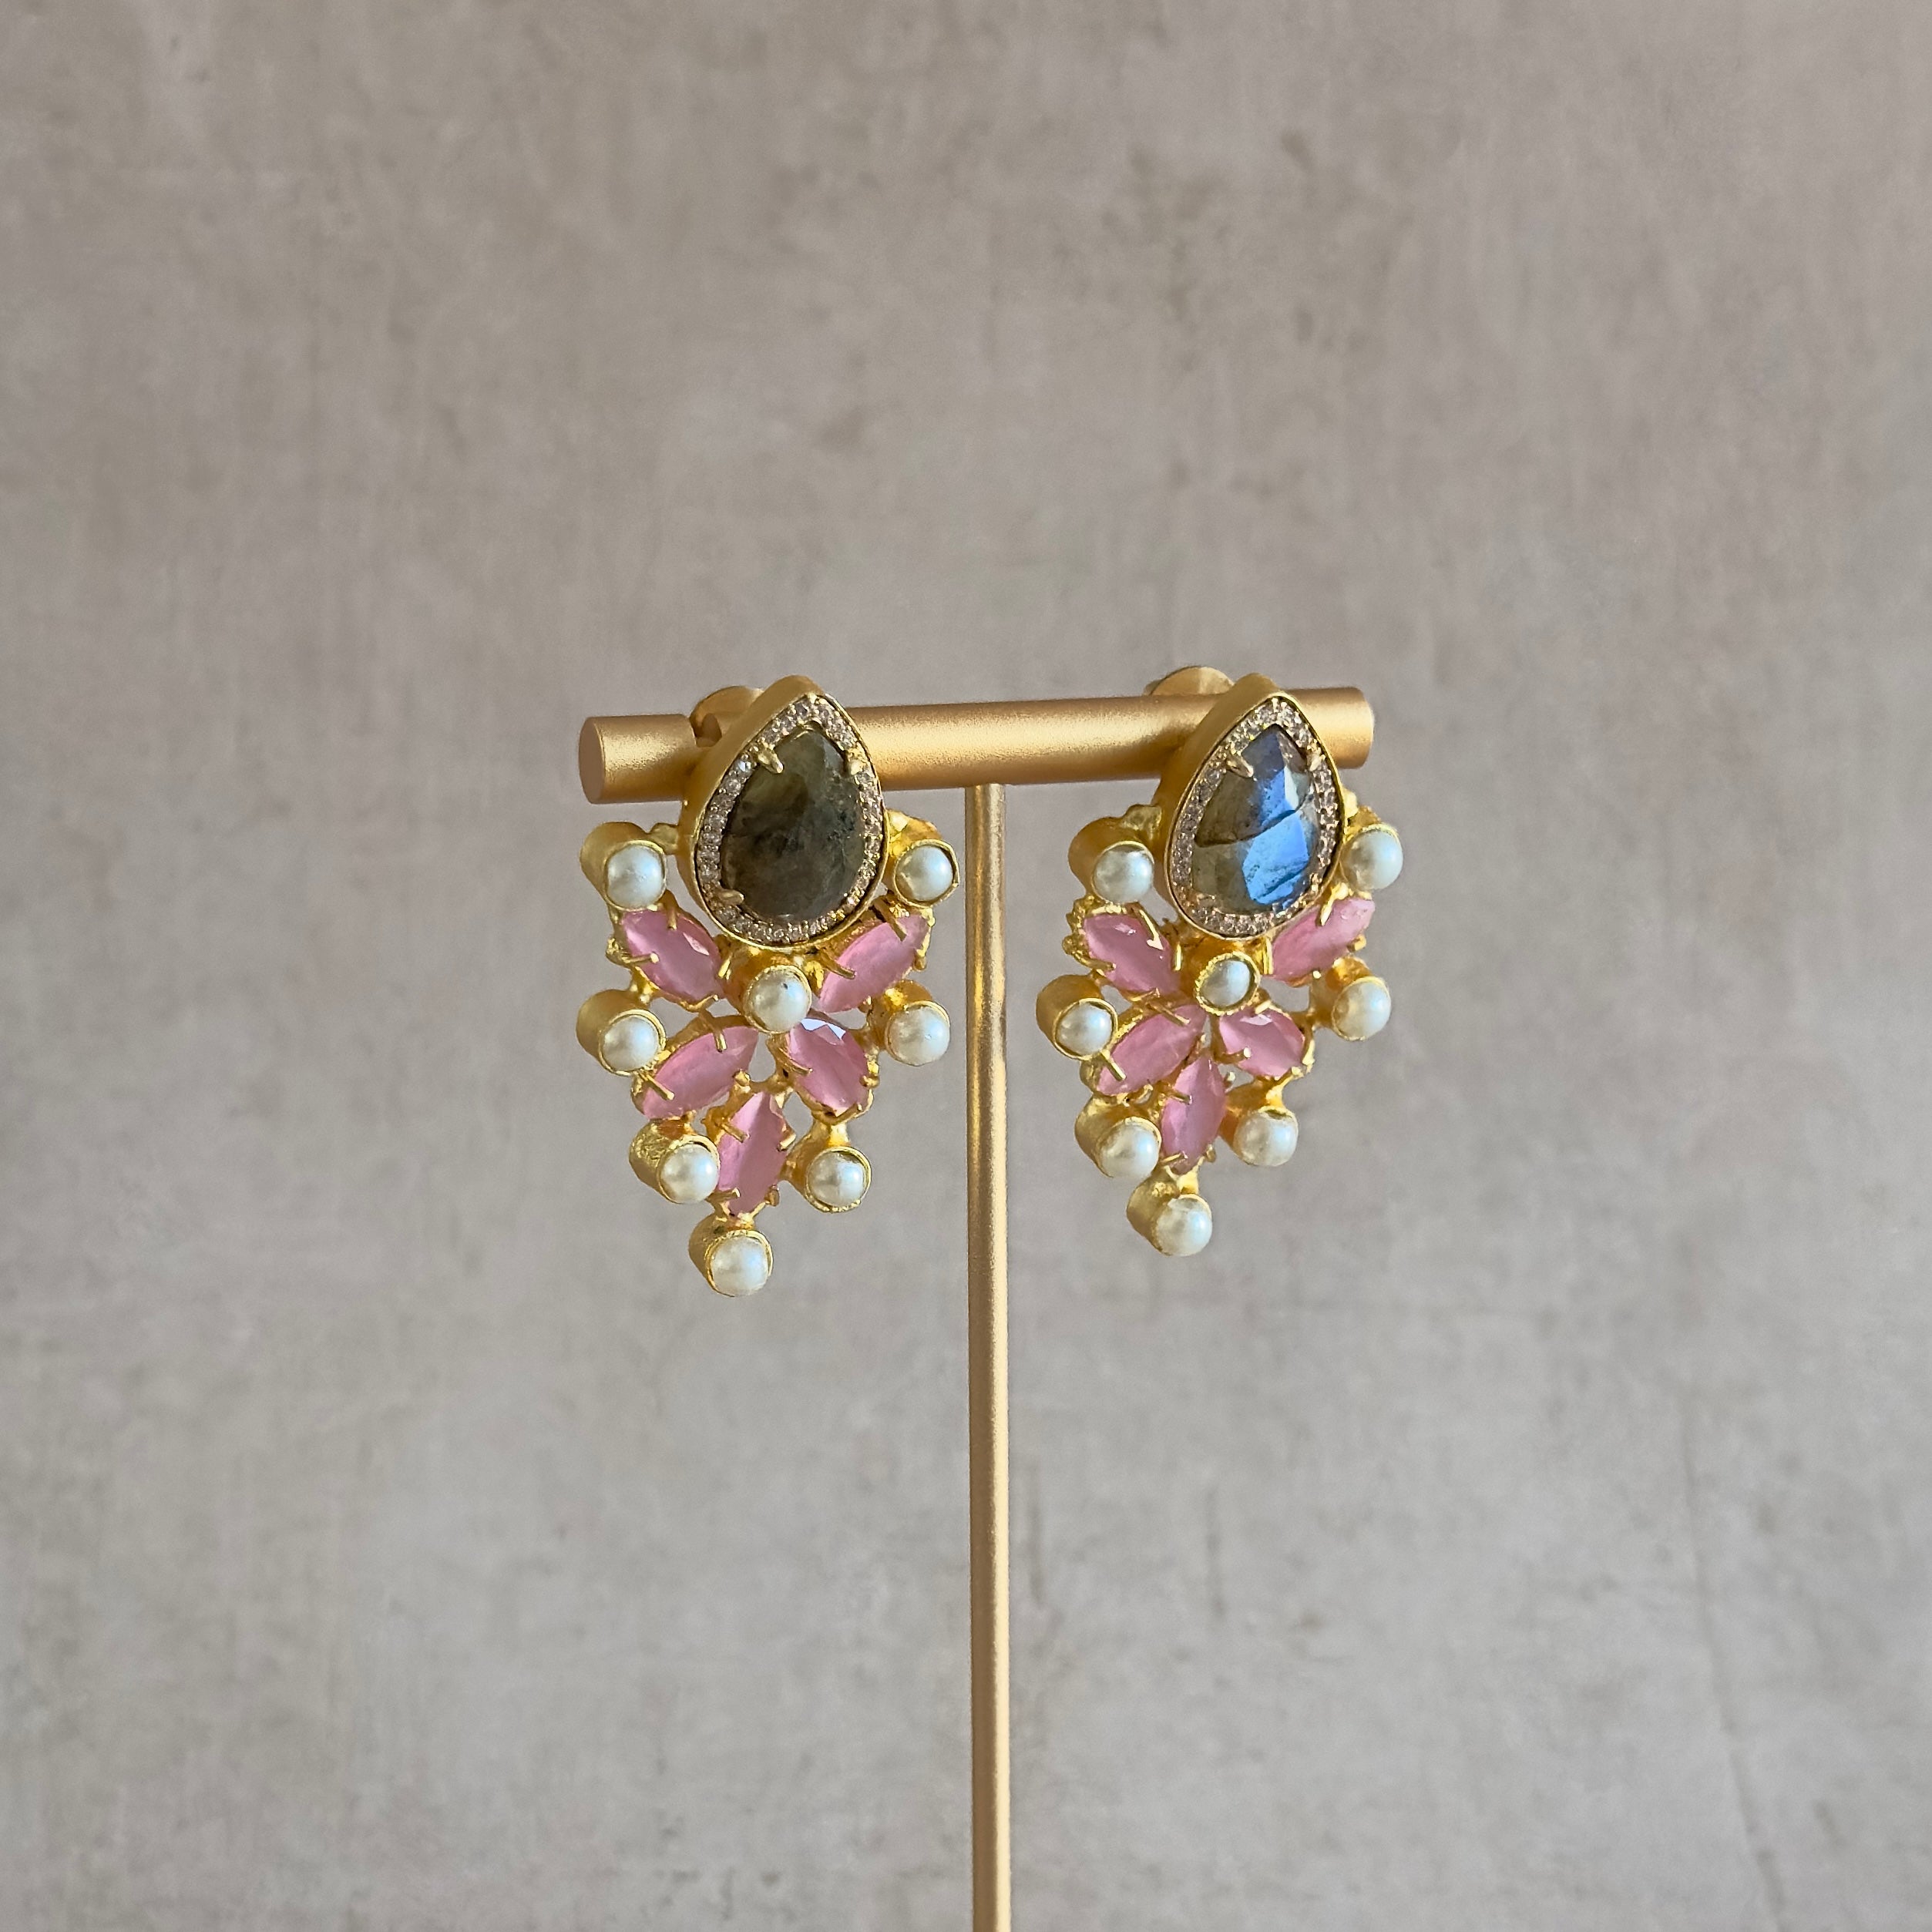 Make a stylish statement with these stunning Pink Earrings. The labradorite stones are surrounded by pink semi-precious gems, making them a truly luxurious piece of jewelry that will create a lasting impression. Adorned with timeless beauty, these earrings are the perfect addition to any special occasion.